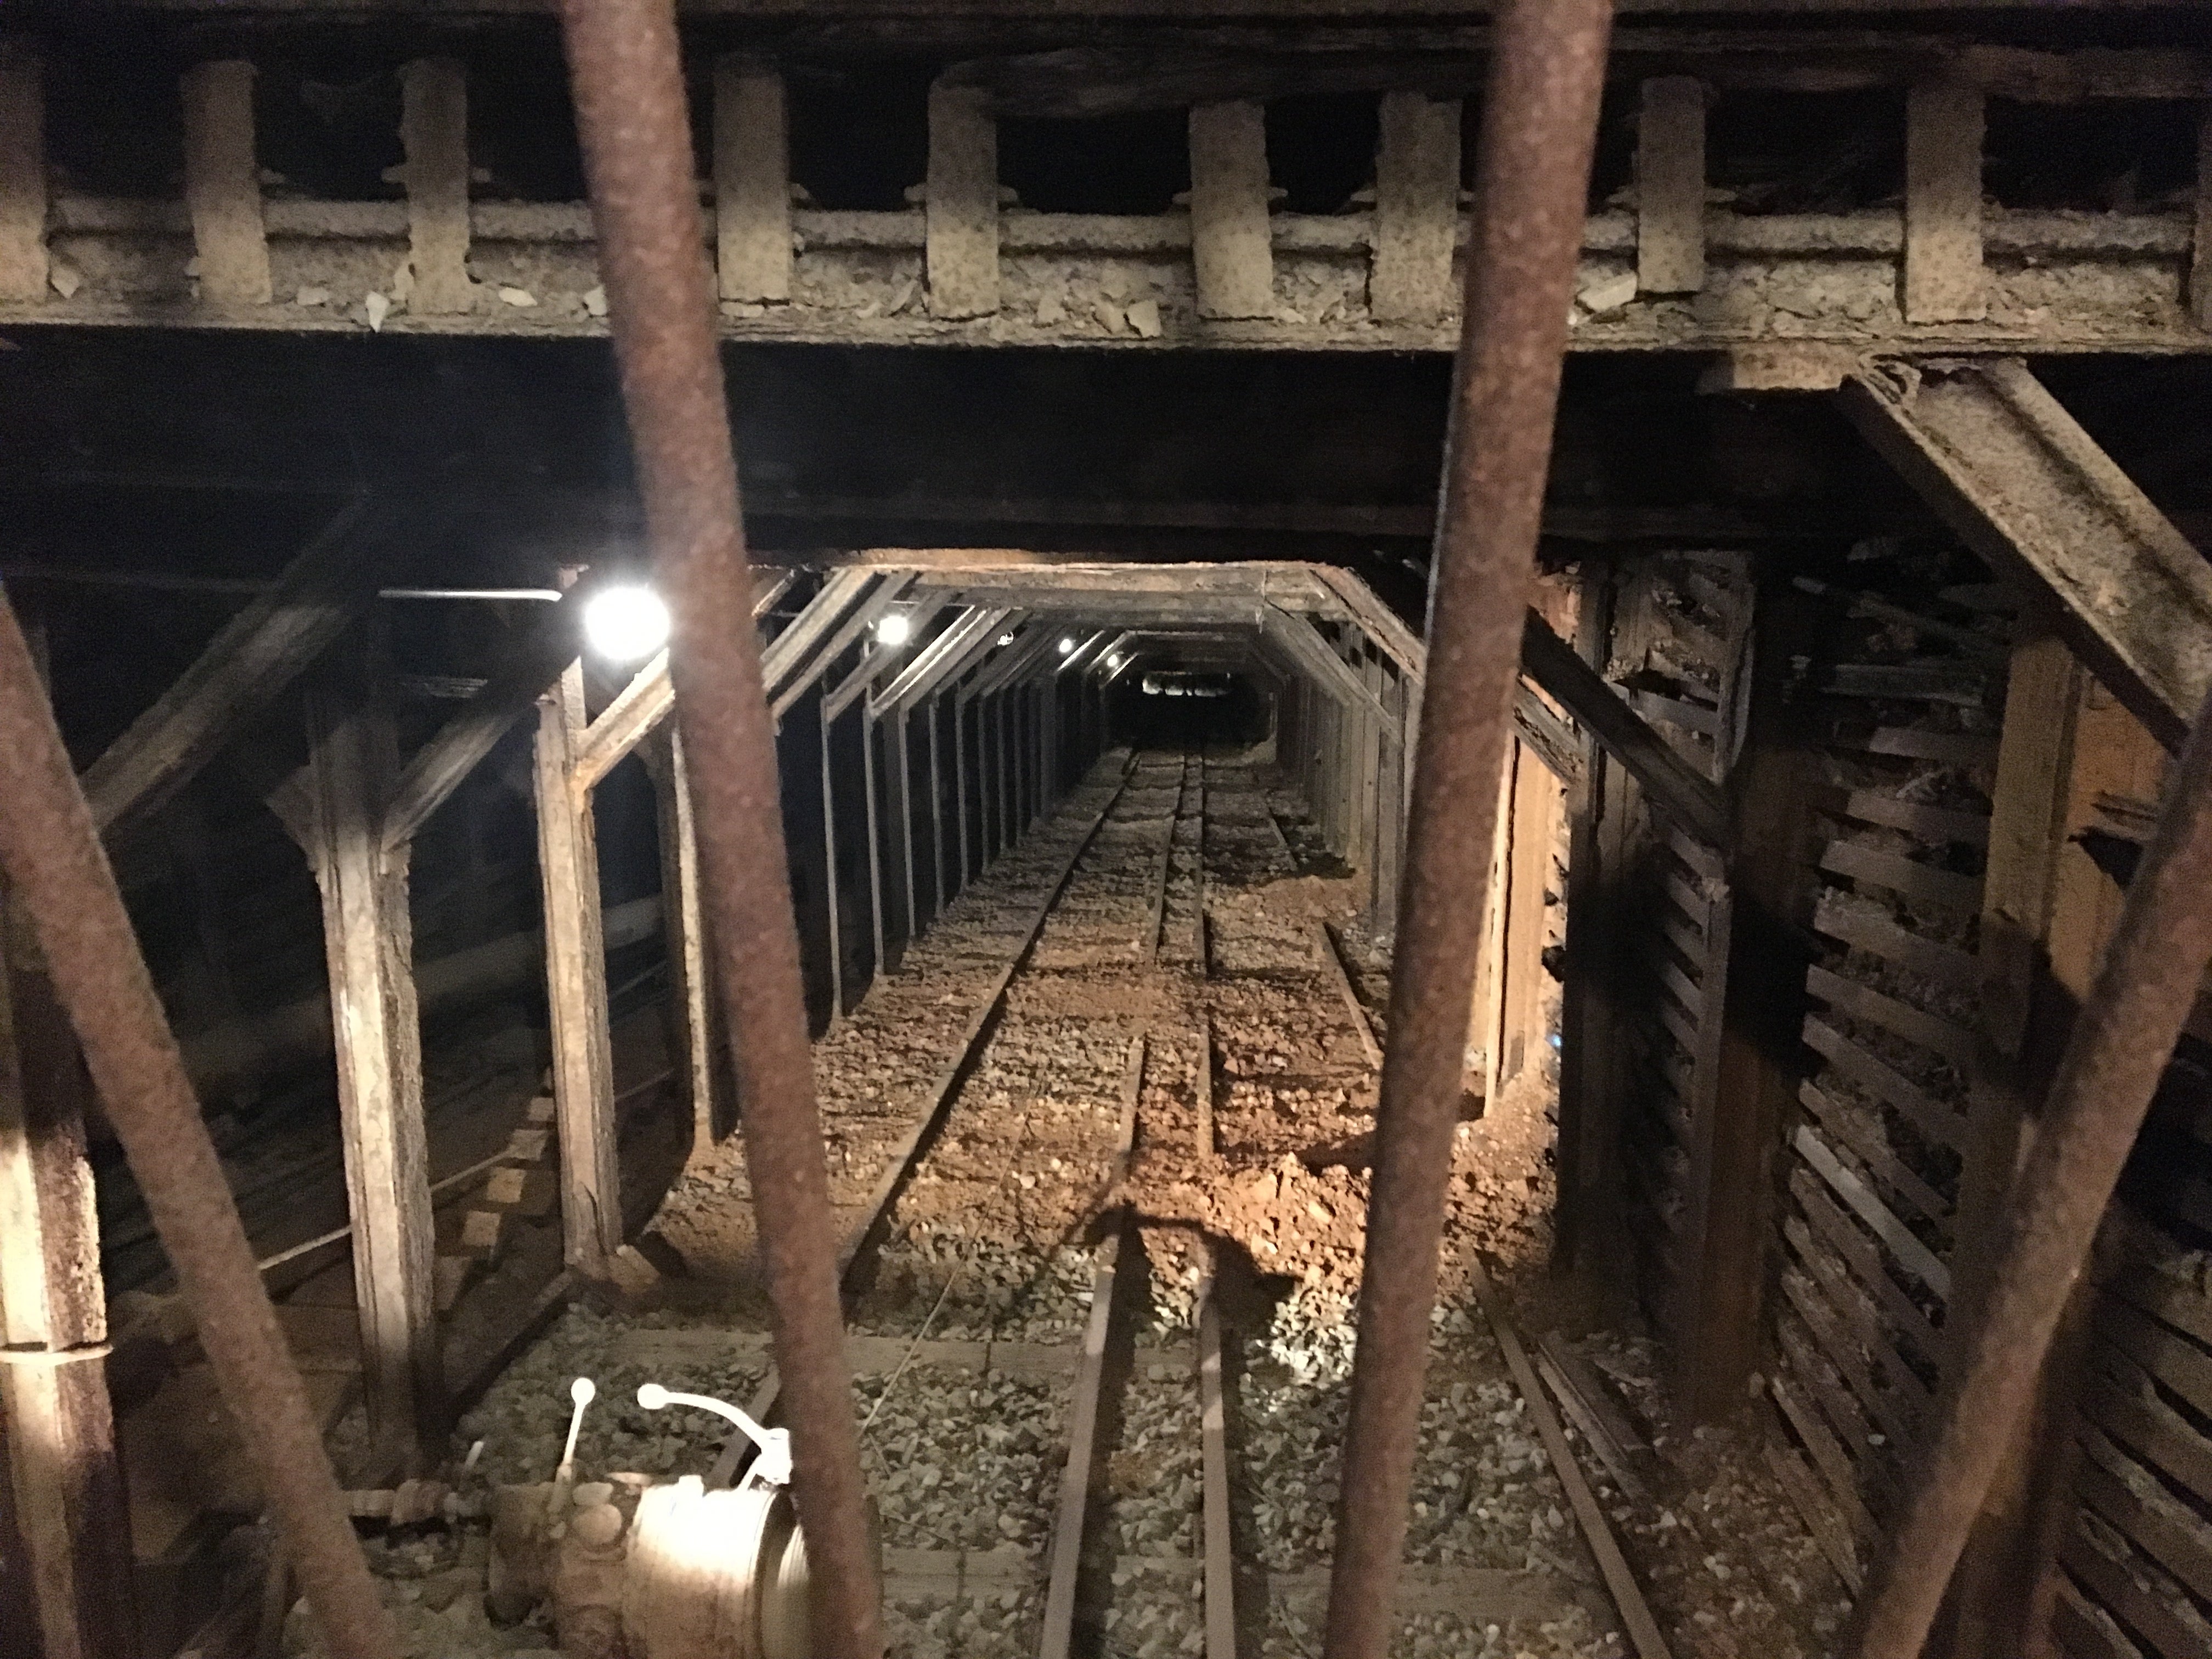 Empire Mine, outside of Grass Valley, was once one of the most lucrative mines in the state. The mine ceased operation in 1956 and became a state historic park in 1974. Today, visitors can look down the old mine shaft, which went down over 11,000 feet (and over a vertical mile deep). (Photo: Leah Campbell)